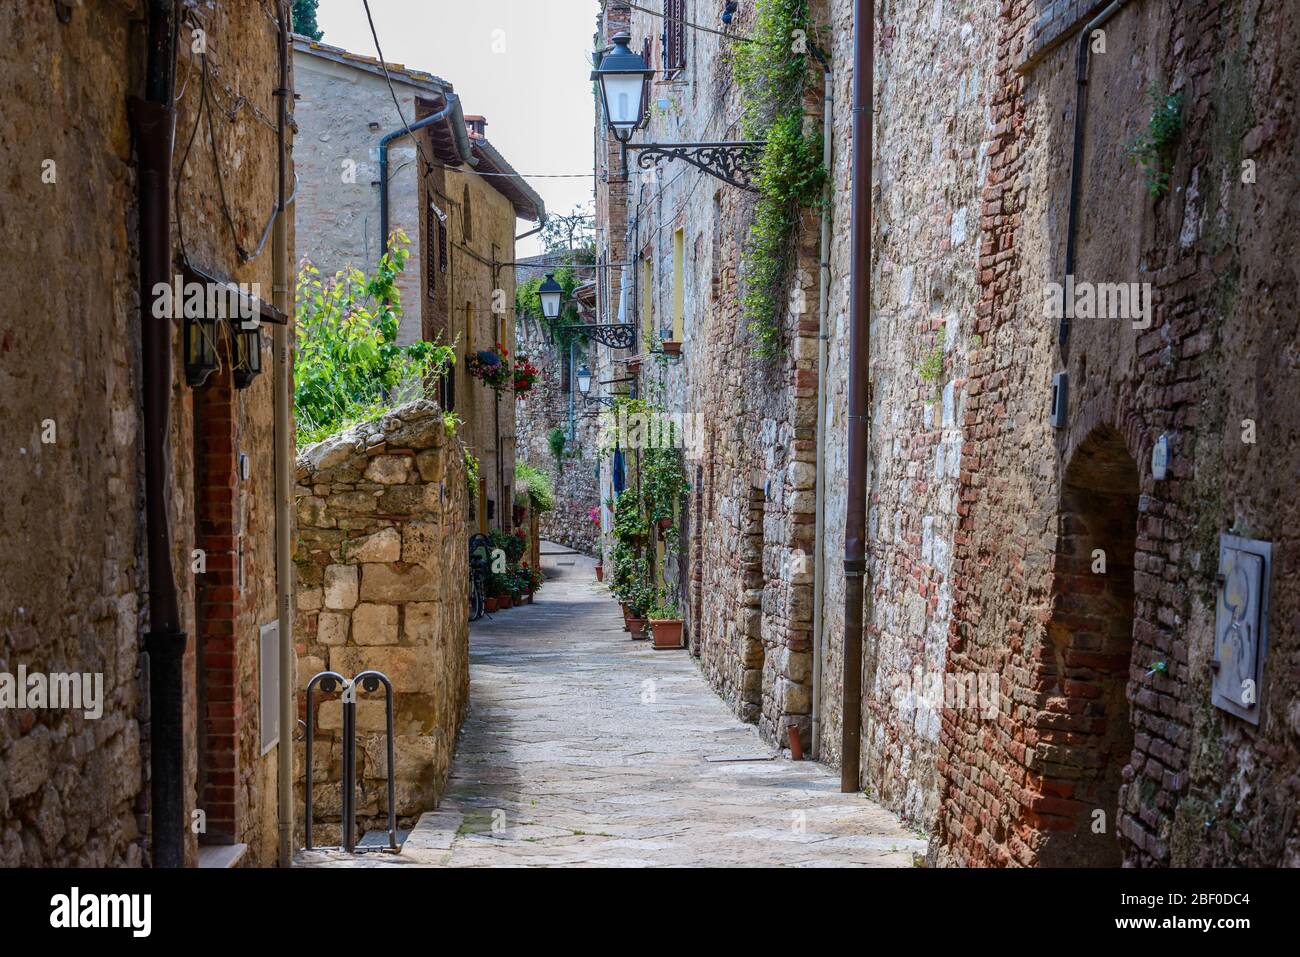 Colle di Val d'Elsa, Tuscany / Italy: A picturesque narrow curving alley with typical local houses in the historic upper town Colle Alta. Stock Photo